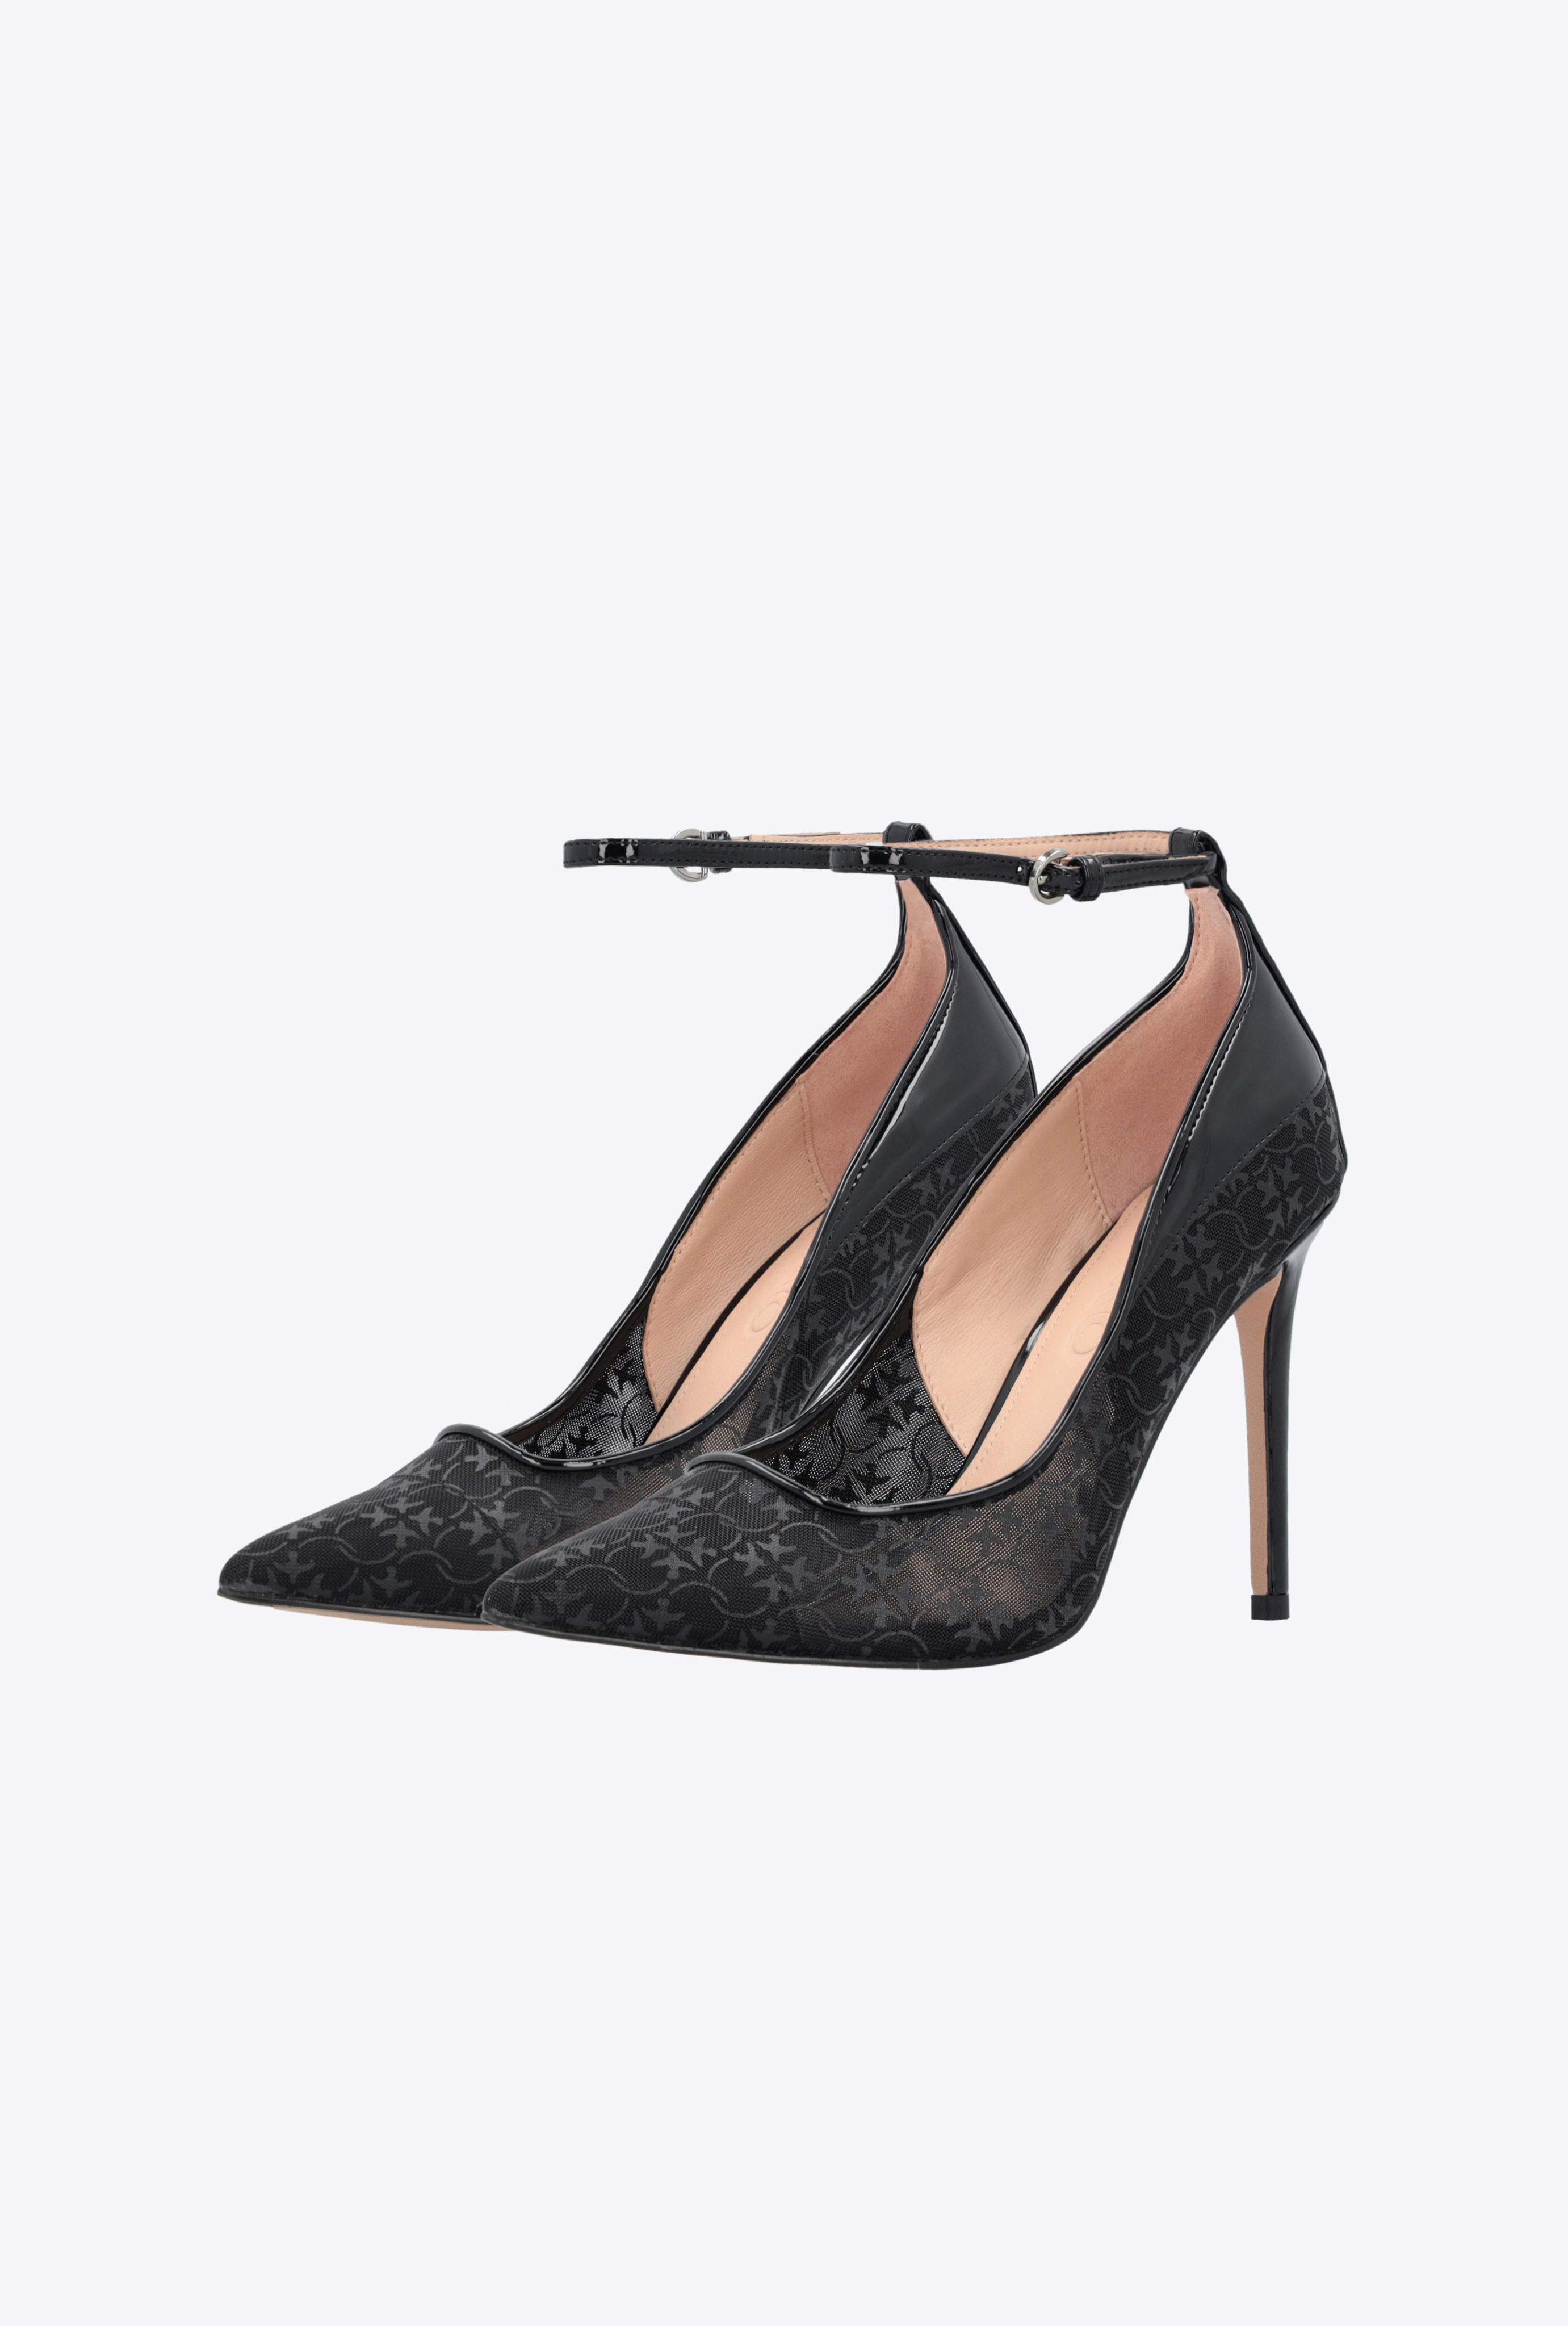 LOVE BIRDS PATENT AND MESH PUMPS - 6